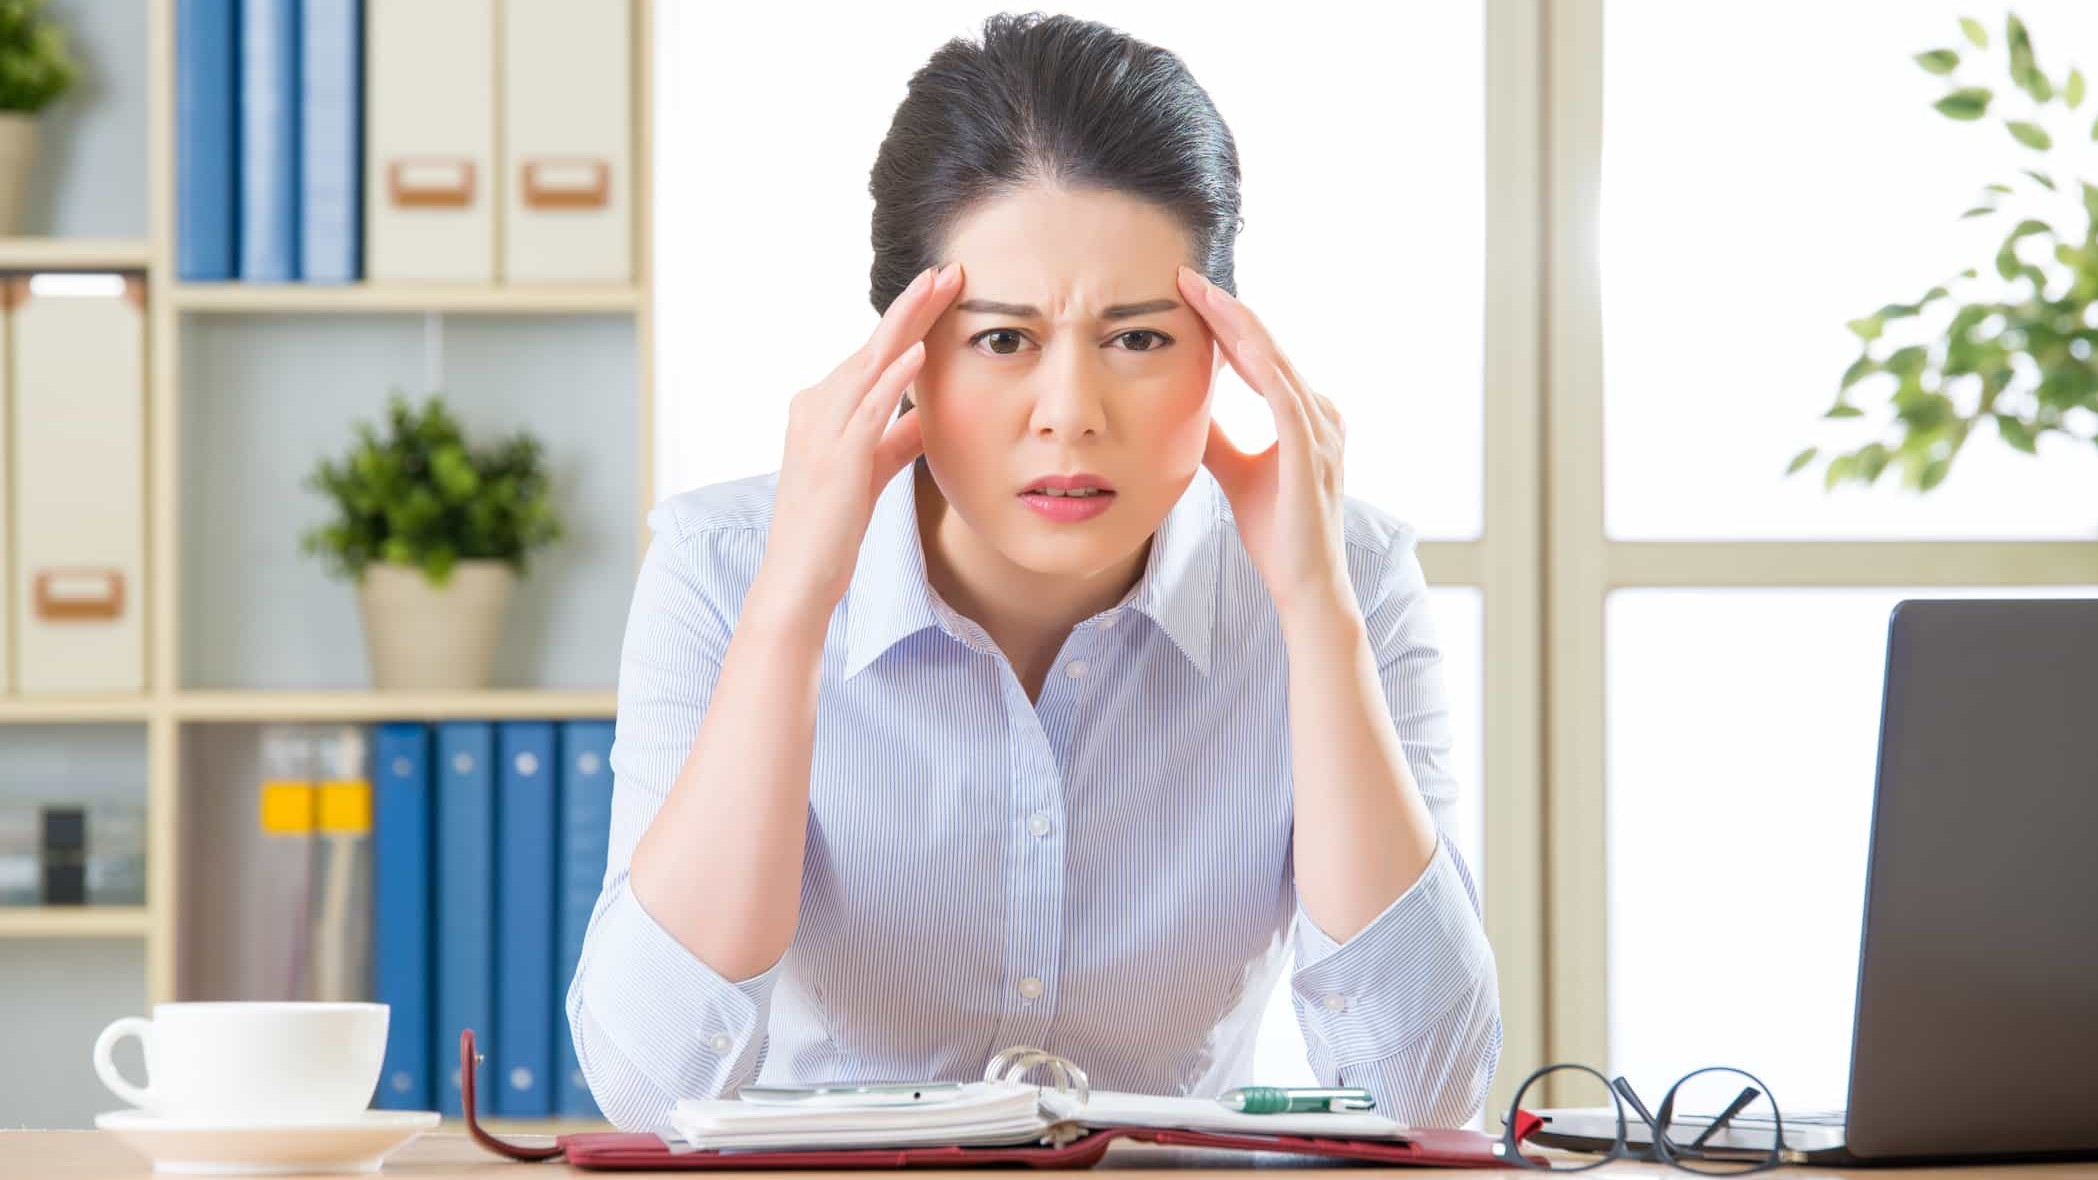 What are the causes of dizziness, nausea, and blurred vision upon waking up in the morning after sleep?